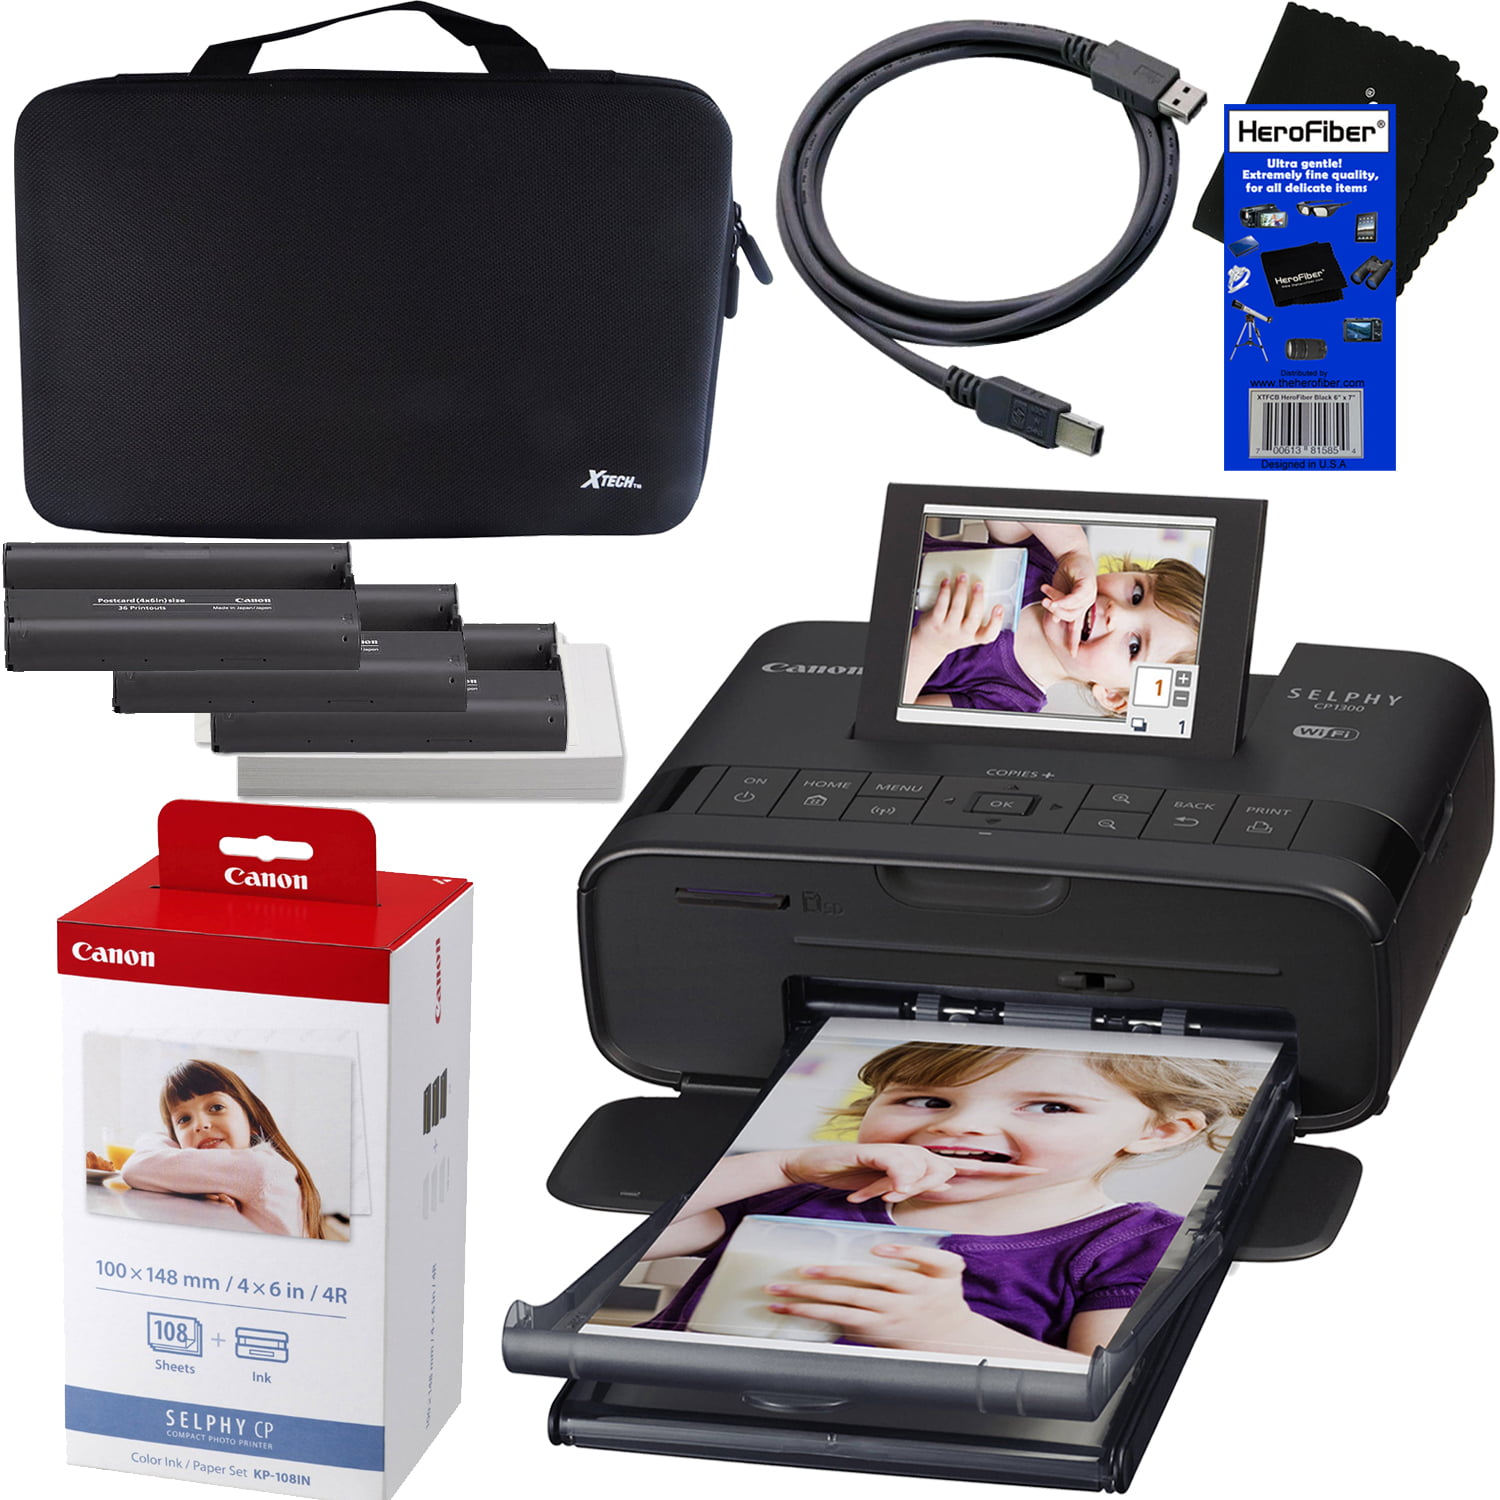 USB Printer Cable Black Canon SELPHY CP1300 Wireless Compact Photo Printer + Xtech Custom Case + Canon KP-108IN Color Ink Paper Set HeroFiber Cleaning Clot Produces up to 108 of 4 x 6 prints